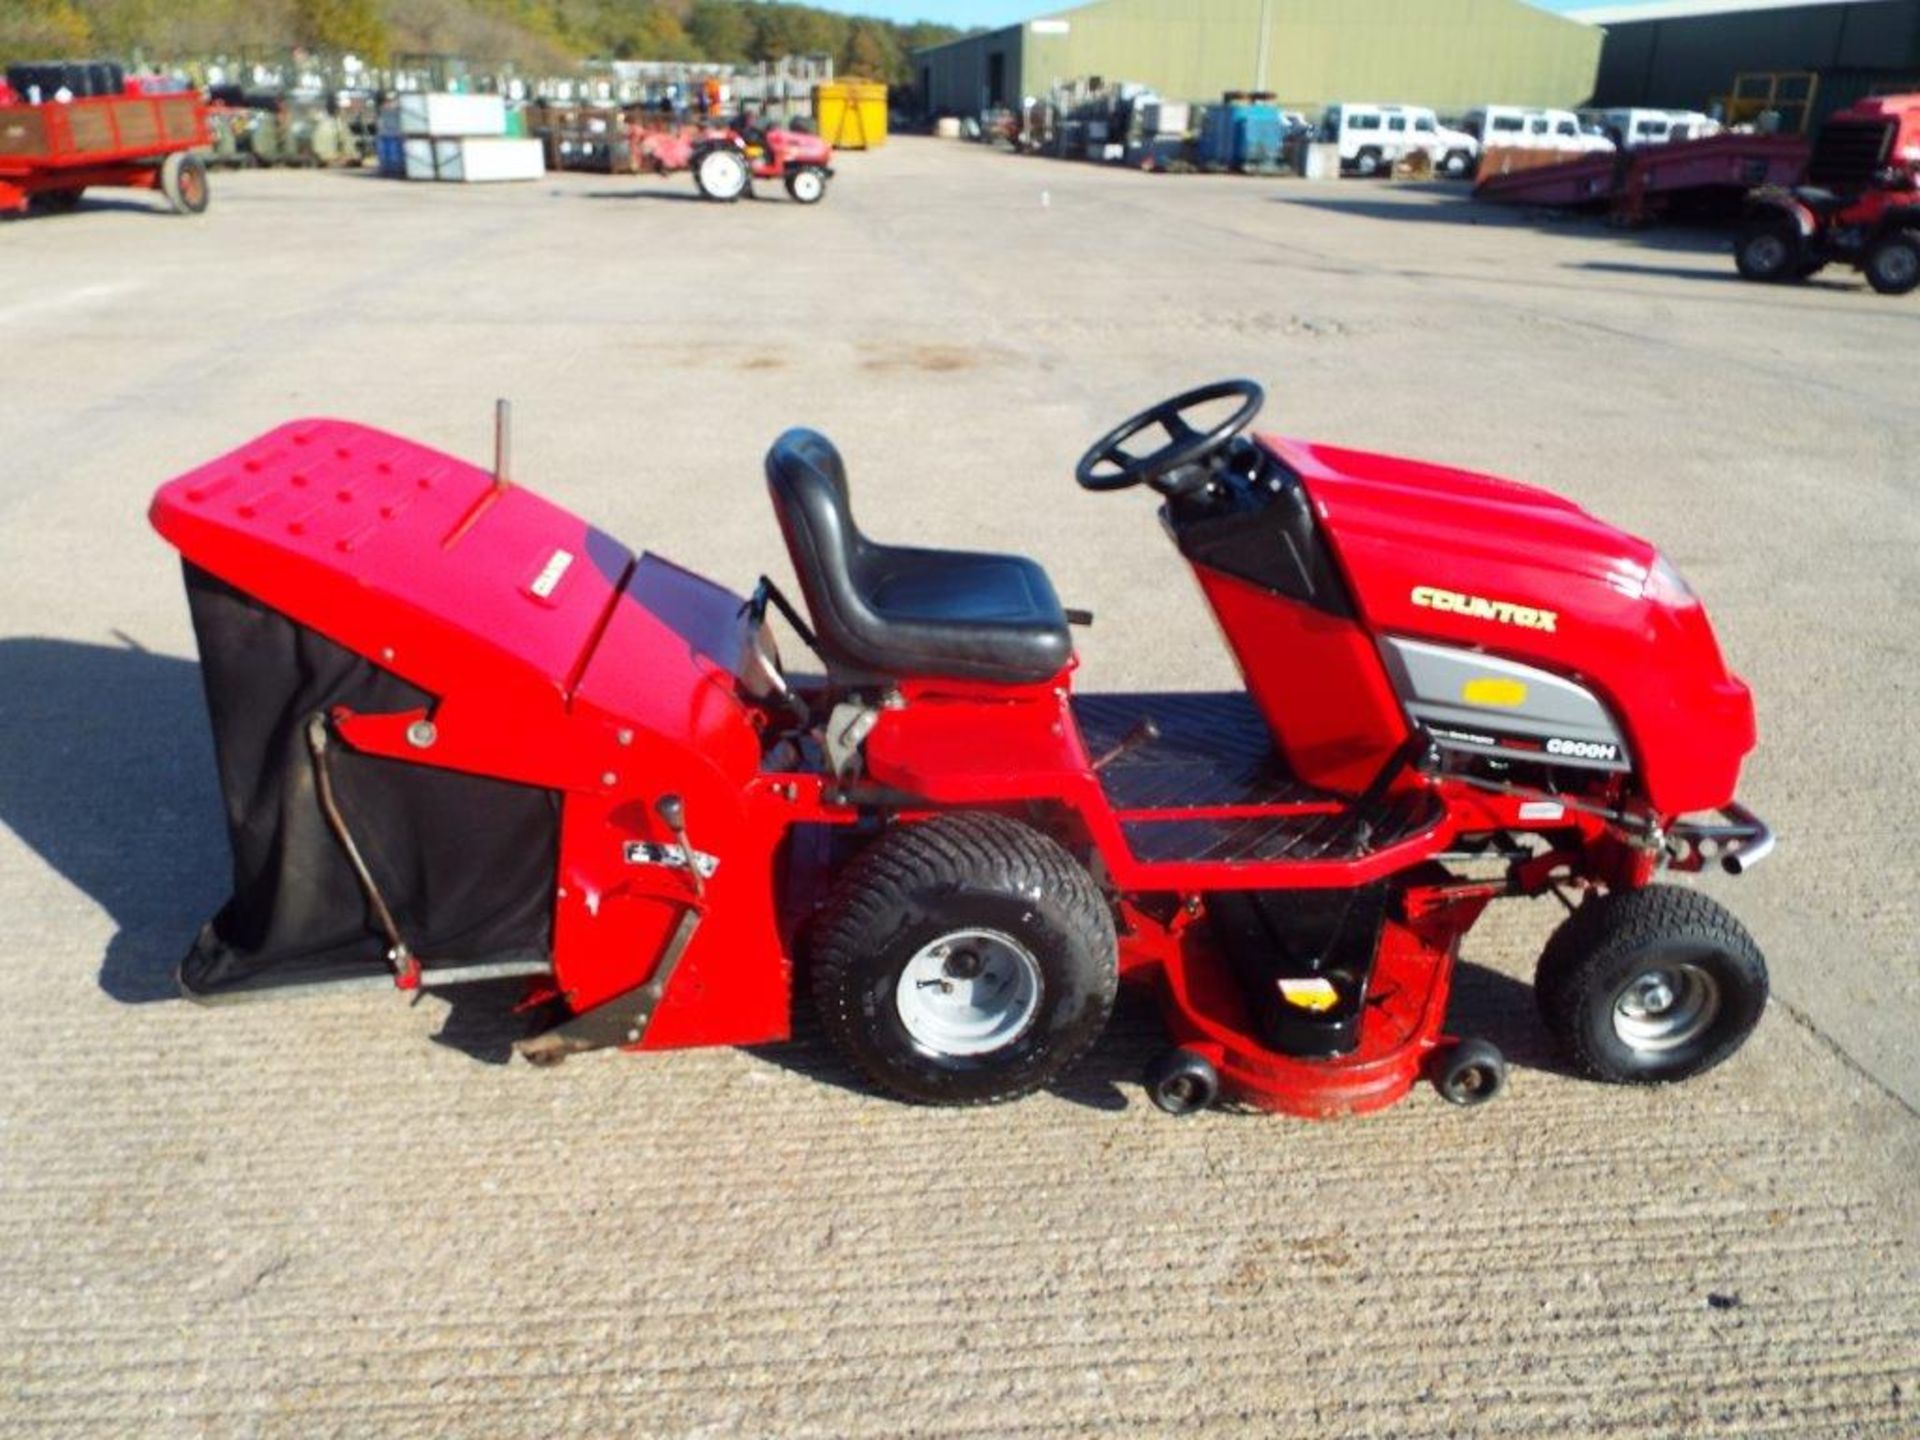 Countax C800H Ride On Mower with Rear Brush and Grass Collector - Bild 8 aus 20